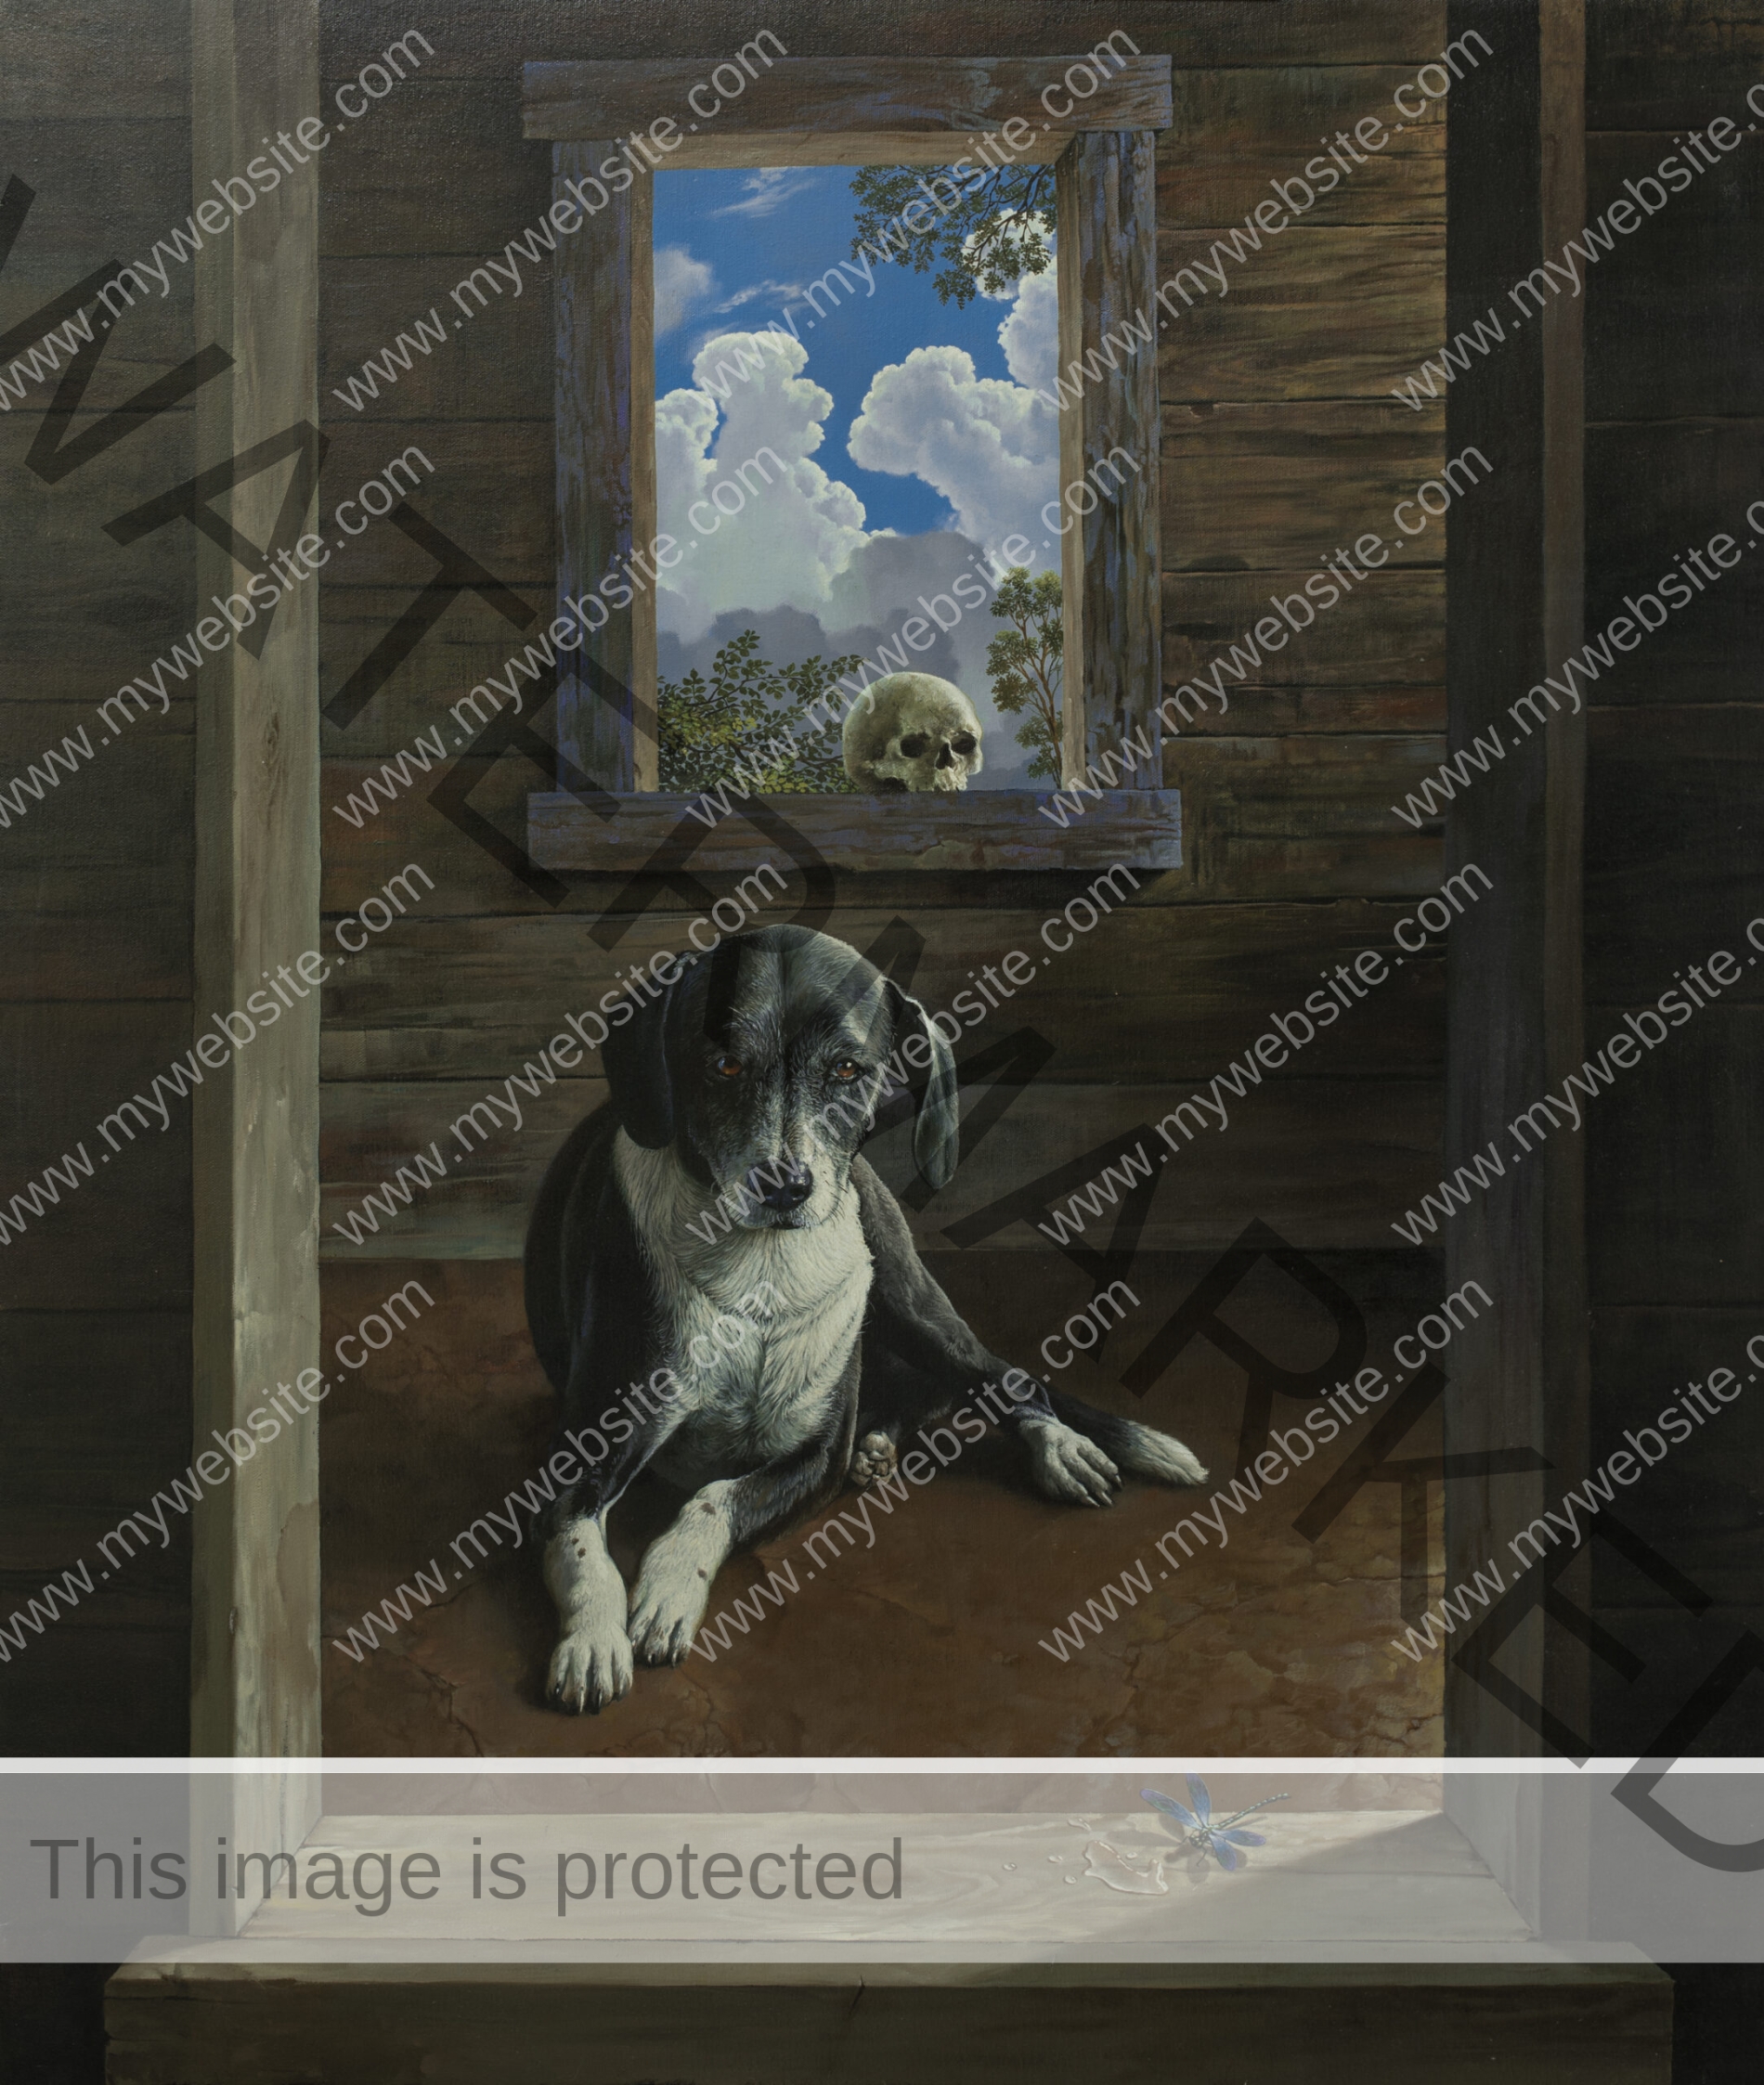 Hyperreal black and white dog painting in a Costa Rican wood cabin. by Gilberto Ramírez. Hyperreal dog painting